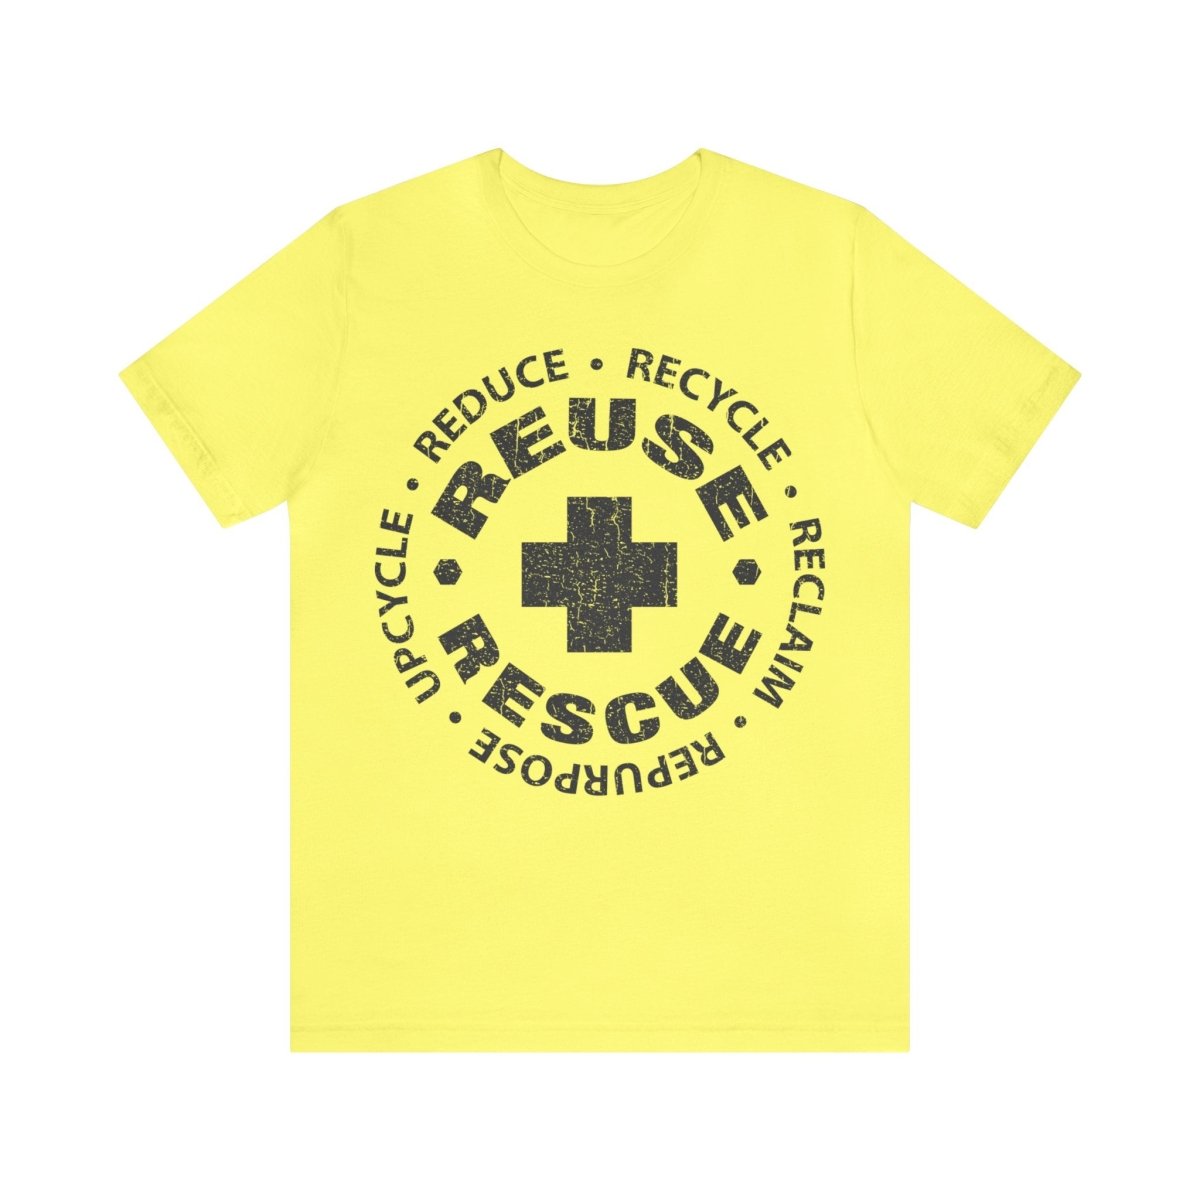 Reuse Rescue Premium T-Shirt, Recycle, Remake, Redo, Reduce, DIY, Reclaim, Upcycle, Self Reliance, Fix It